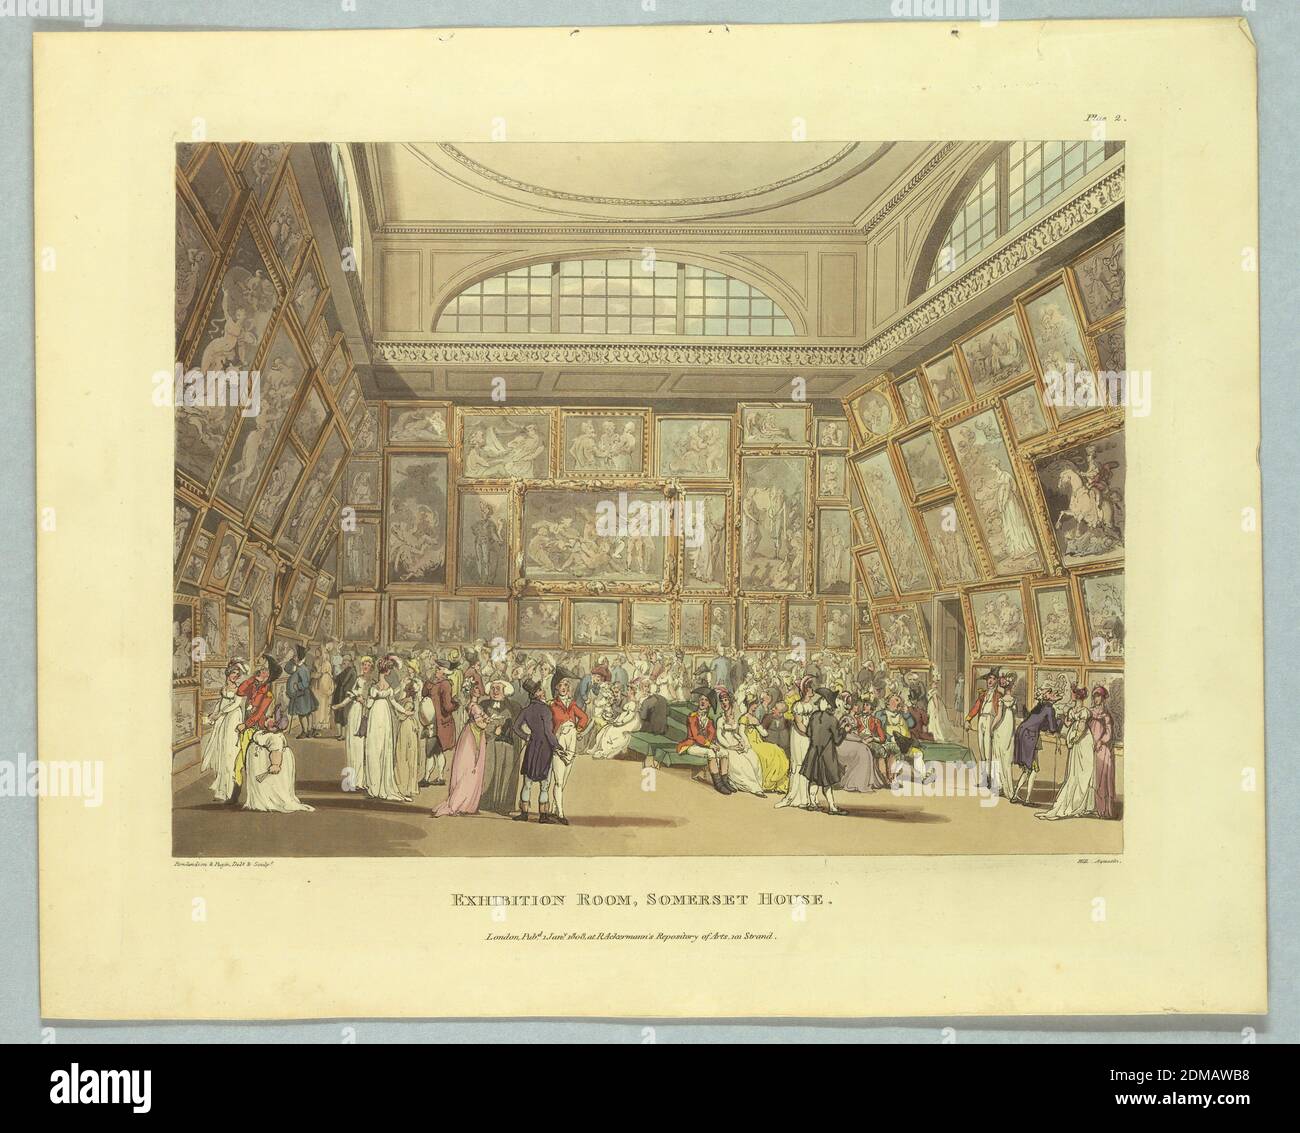 Exhibition Room, Somerset House, from 'Ackermann's Repository', Thomas Rowlandson, British, 1756–1827, Augustus Charles Pugin, French, active Great Britain, ca. 1762–1832, John Hill, British, active in the United States, 1770 - 1850, Aquatint, brush and watercolors on paper, Crowded room with couches. Paintings cover the wall space up to high windows. Title, artists', and publisher's names below., Europe, London, England, 1808, Print Stock Photo